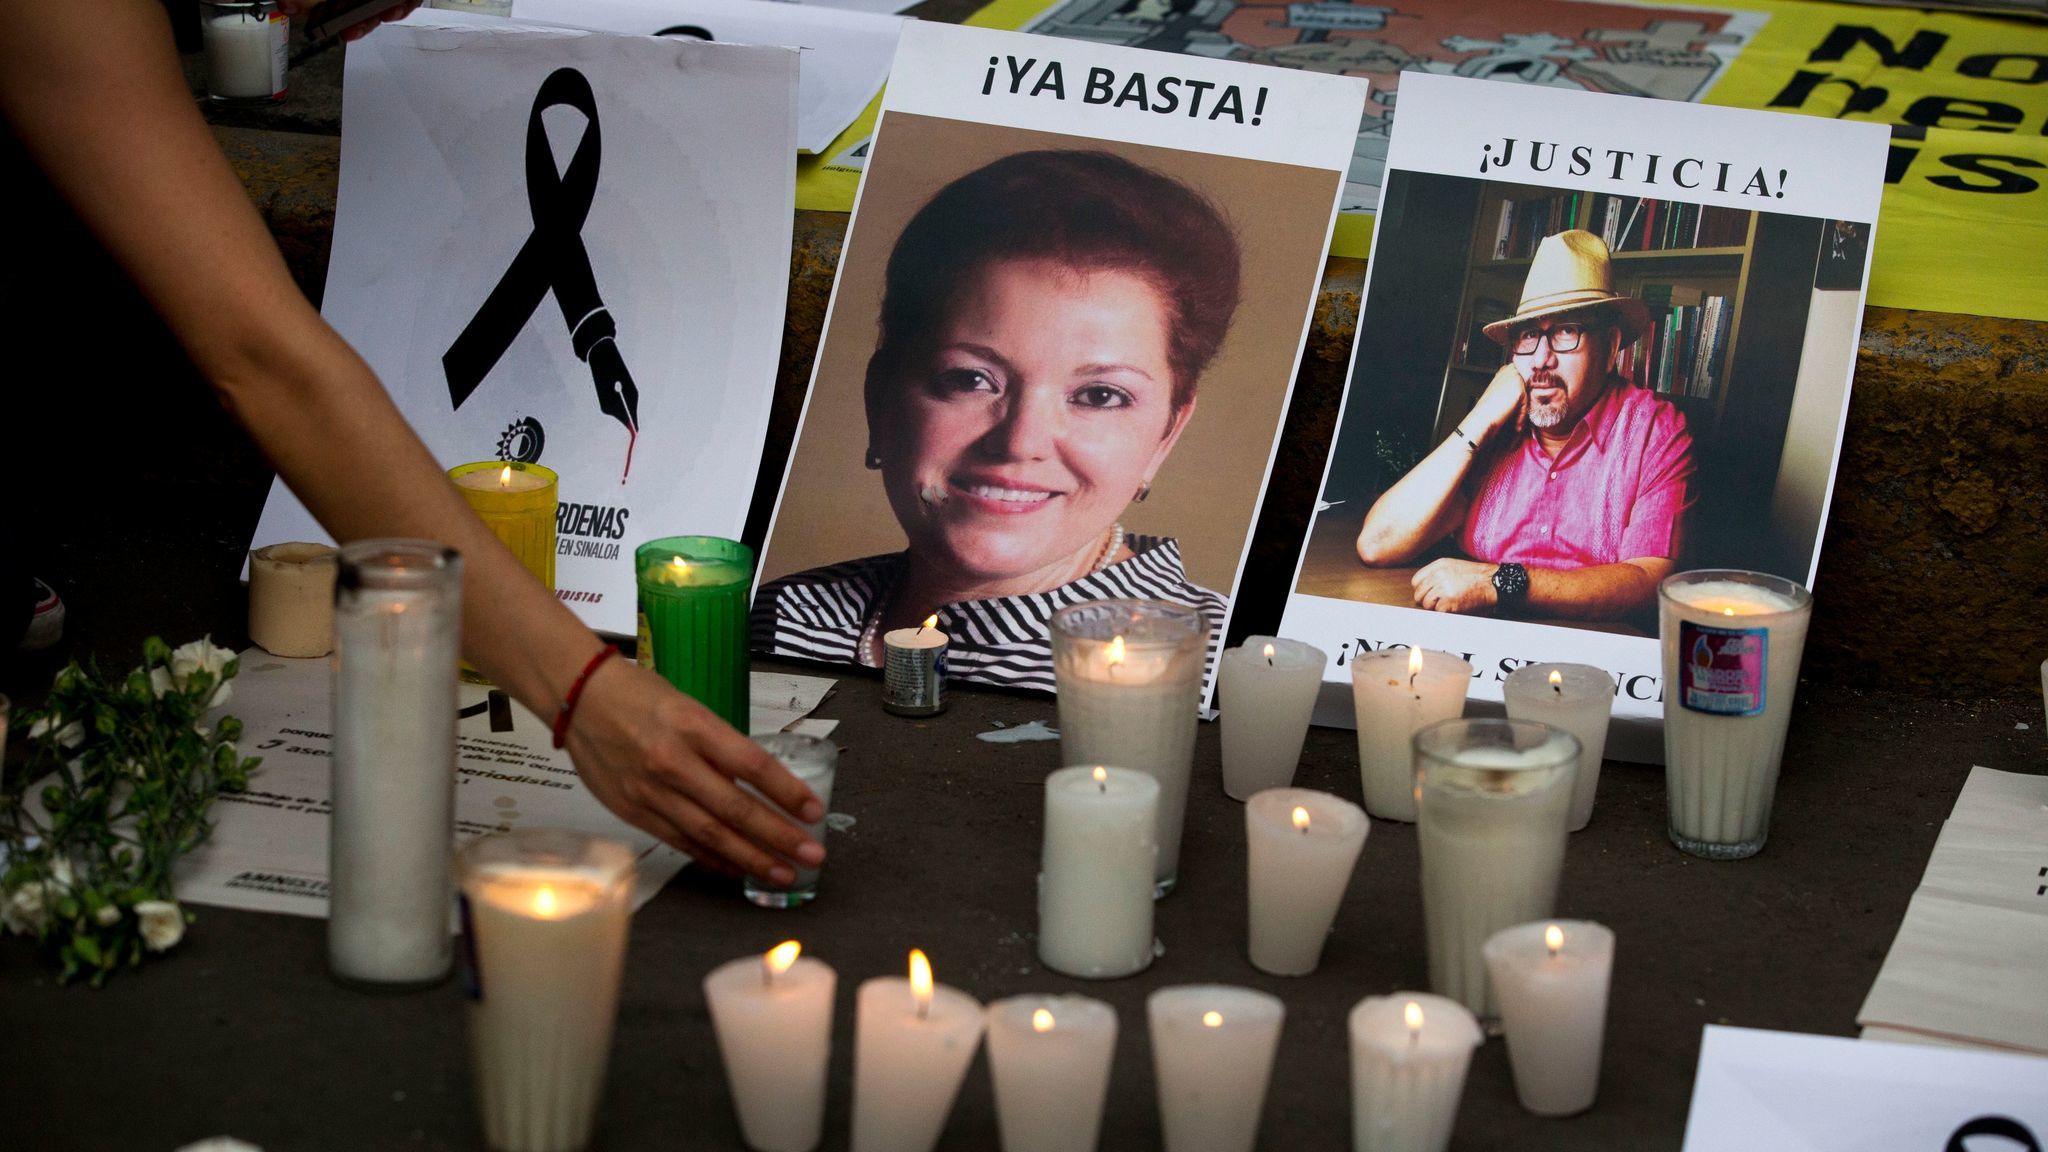 FILE - In this May 16, 2017 file photo, a woman places a candle in front of pictures of murdered jou